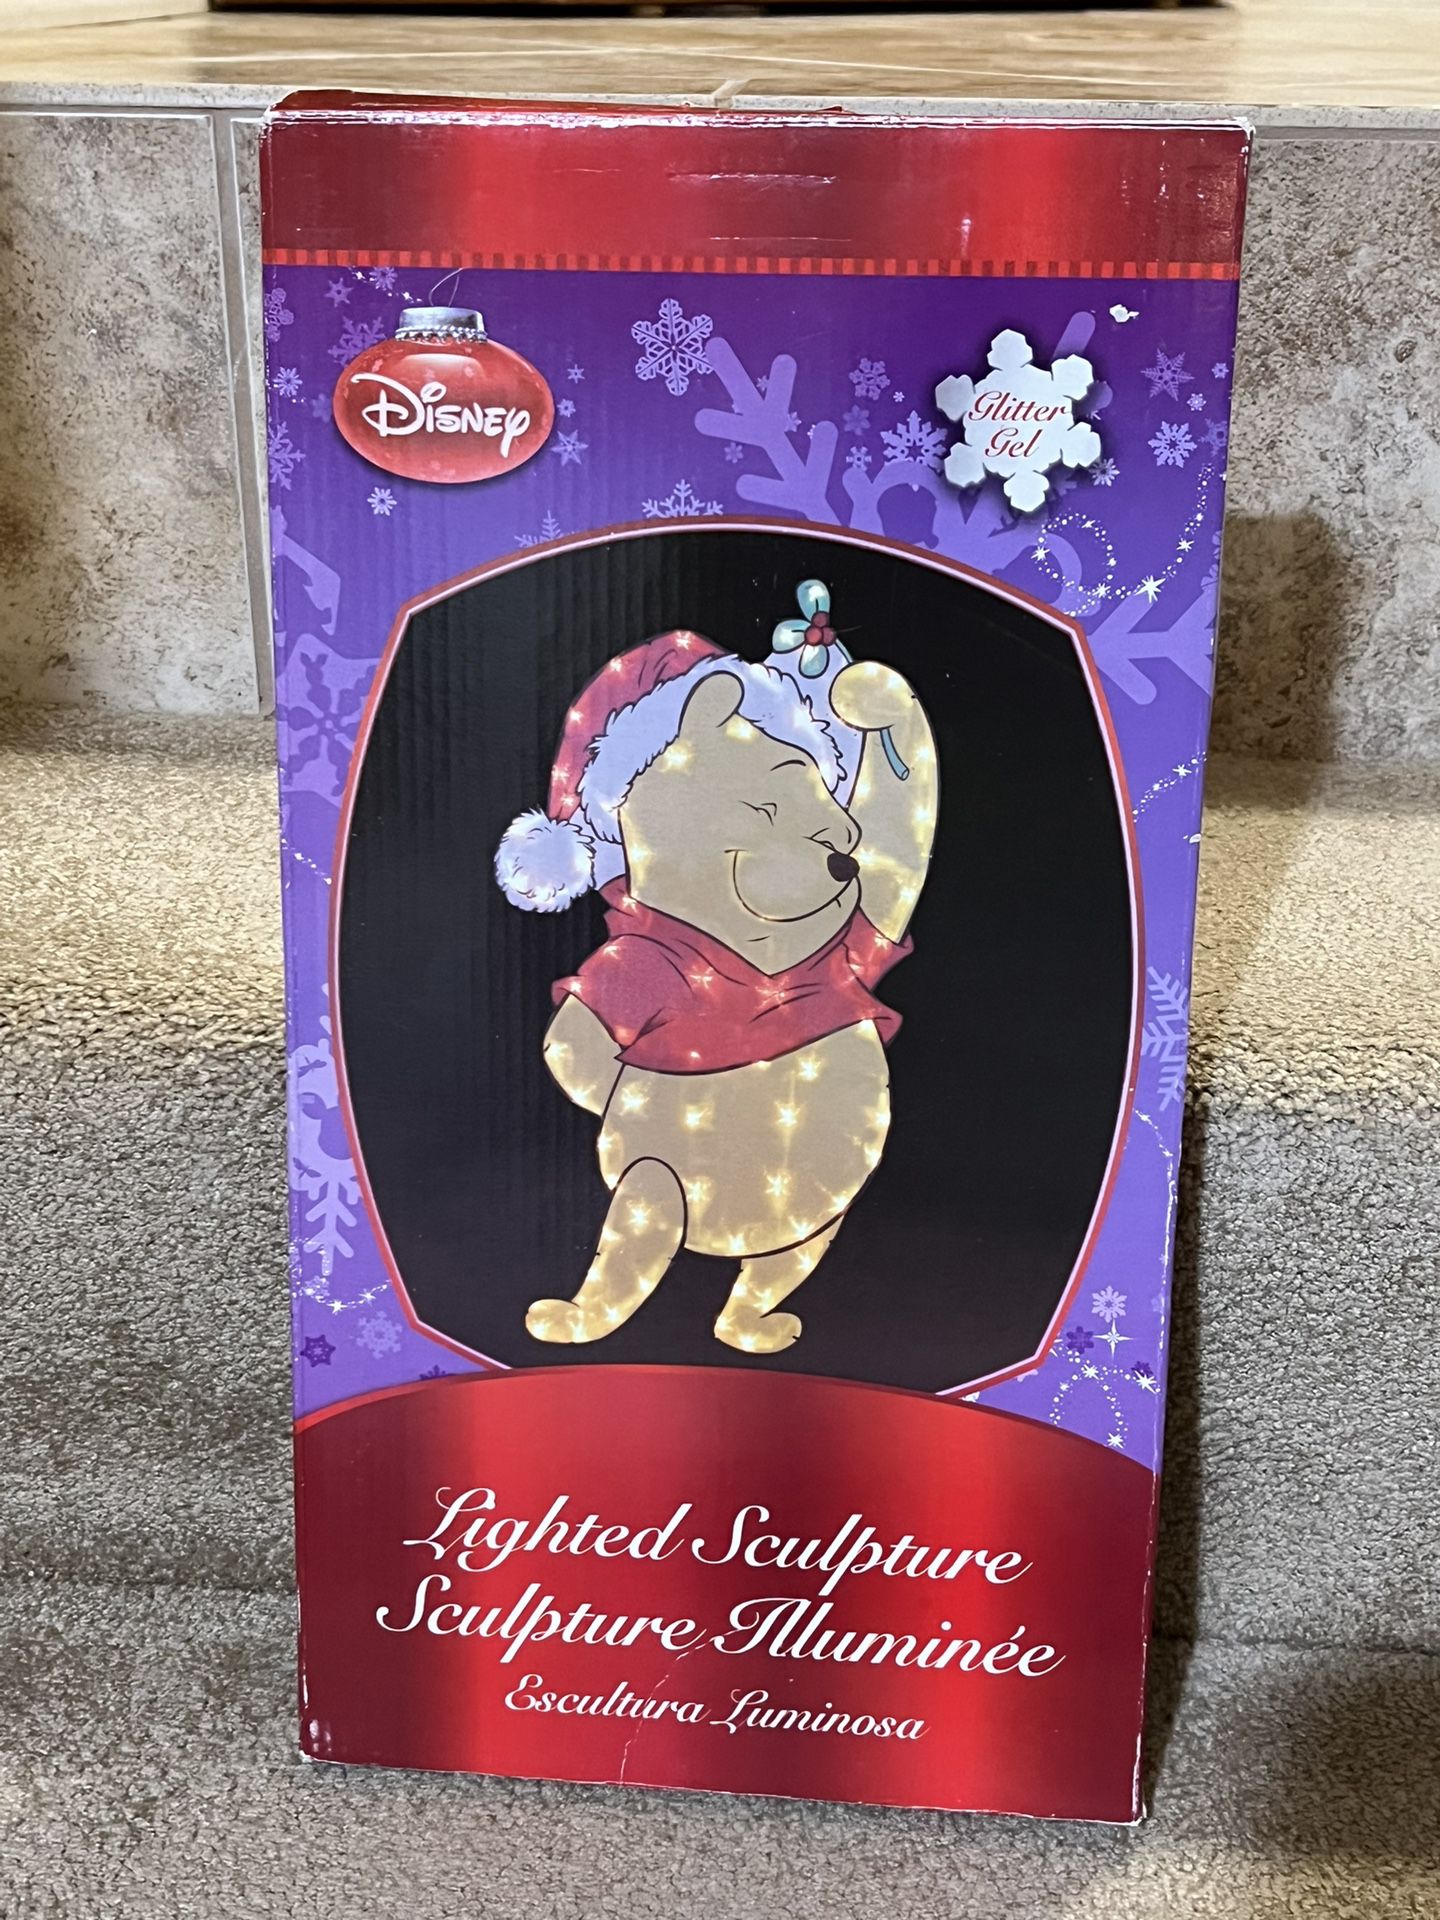 Disney Whinnie The Pooh Christmas Lighted Sculpture 15 "   Indoor Outdoor In box